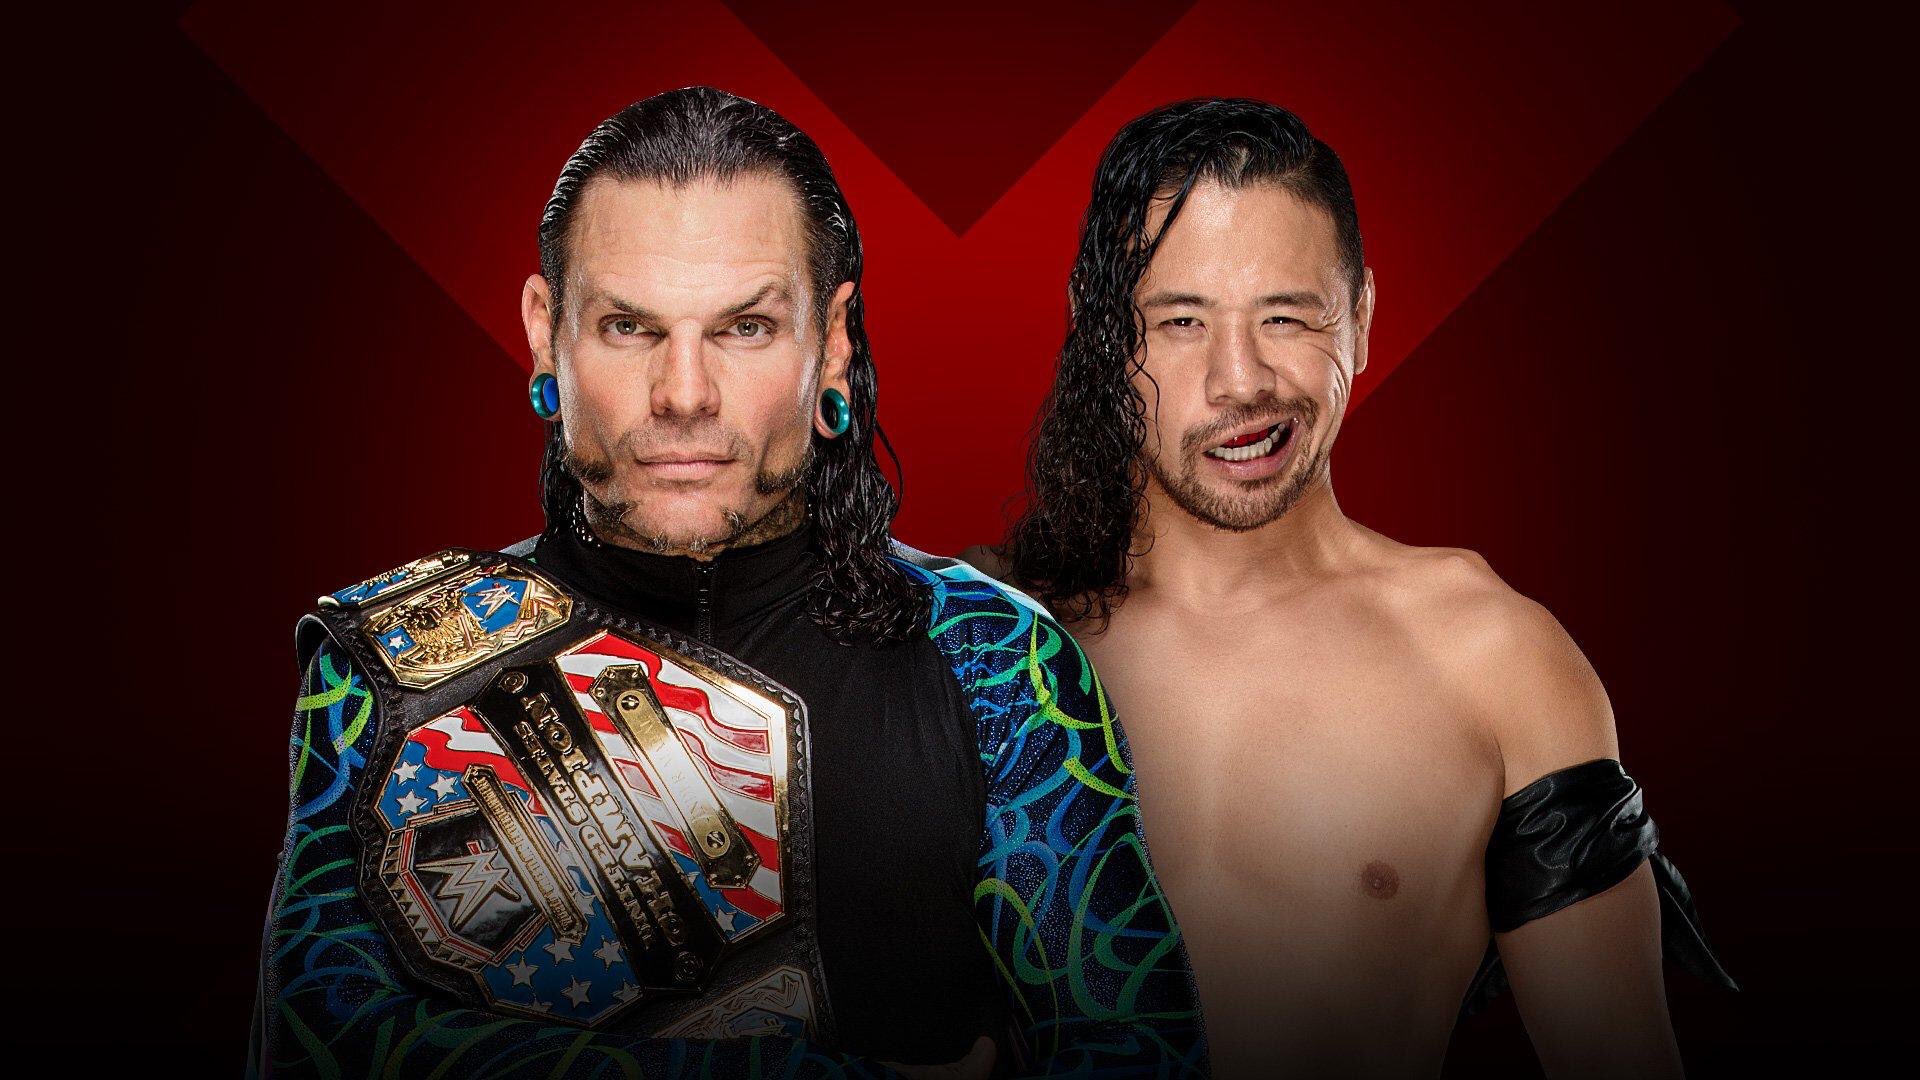 Shinsuke Nakamura Many Things Can Change In A Moment Tonight Is At That Moment For The Ustitle Extremerules